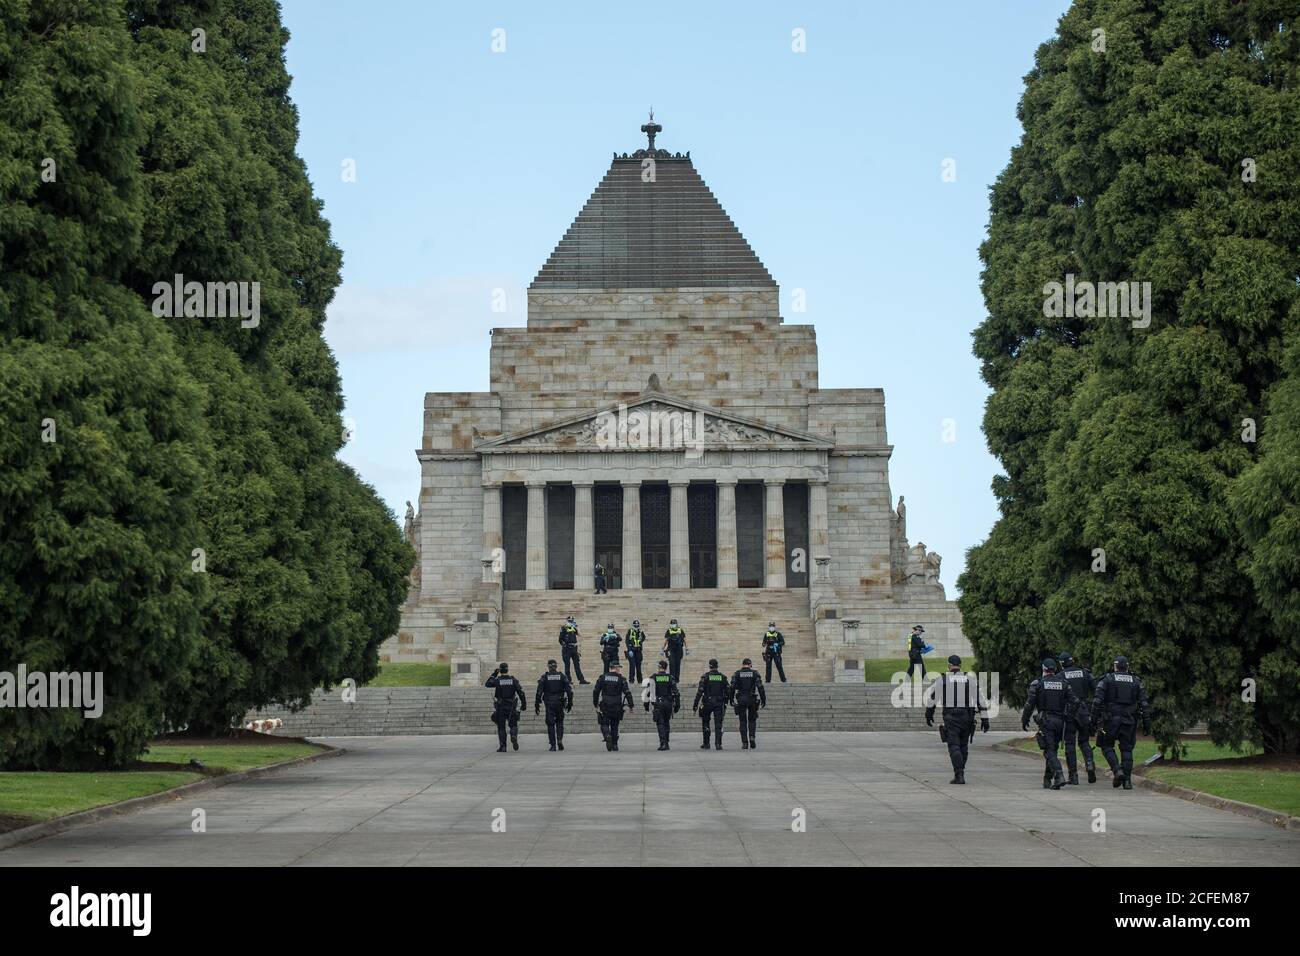 Melbourne, Australia 5 Sep 2020, Victorian Police Public Order Officers walk towards the shrine forecourt at the conclusion of the Freedom Day Anti-mask and anti lockdown protest at the Shrine of Remembrance in Melbourne Australia. Credit: Michael Currie/Alamy Live News Stock Photo